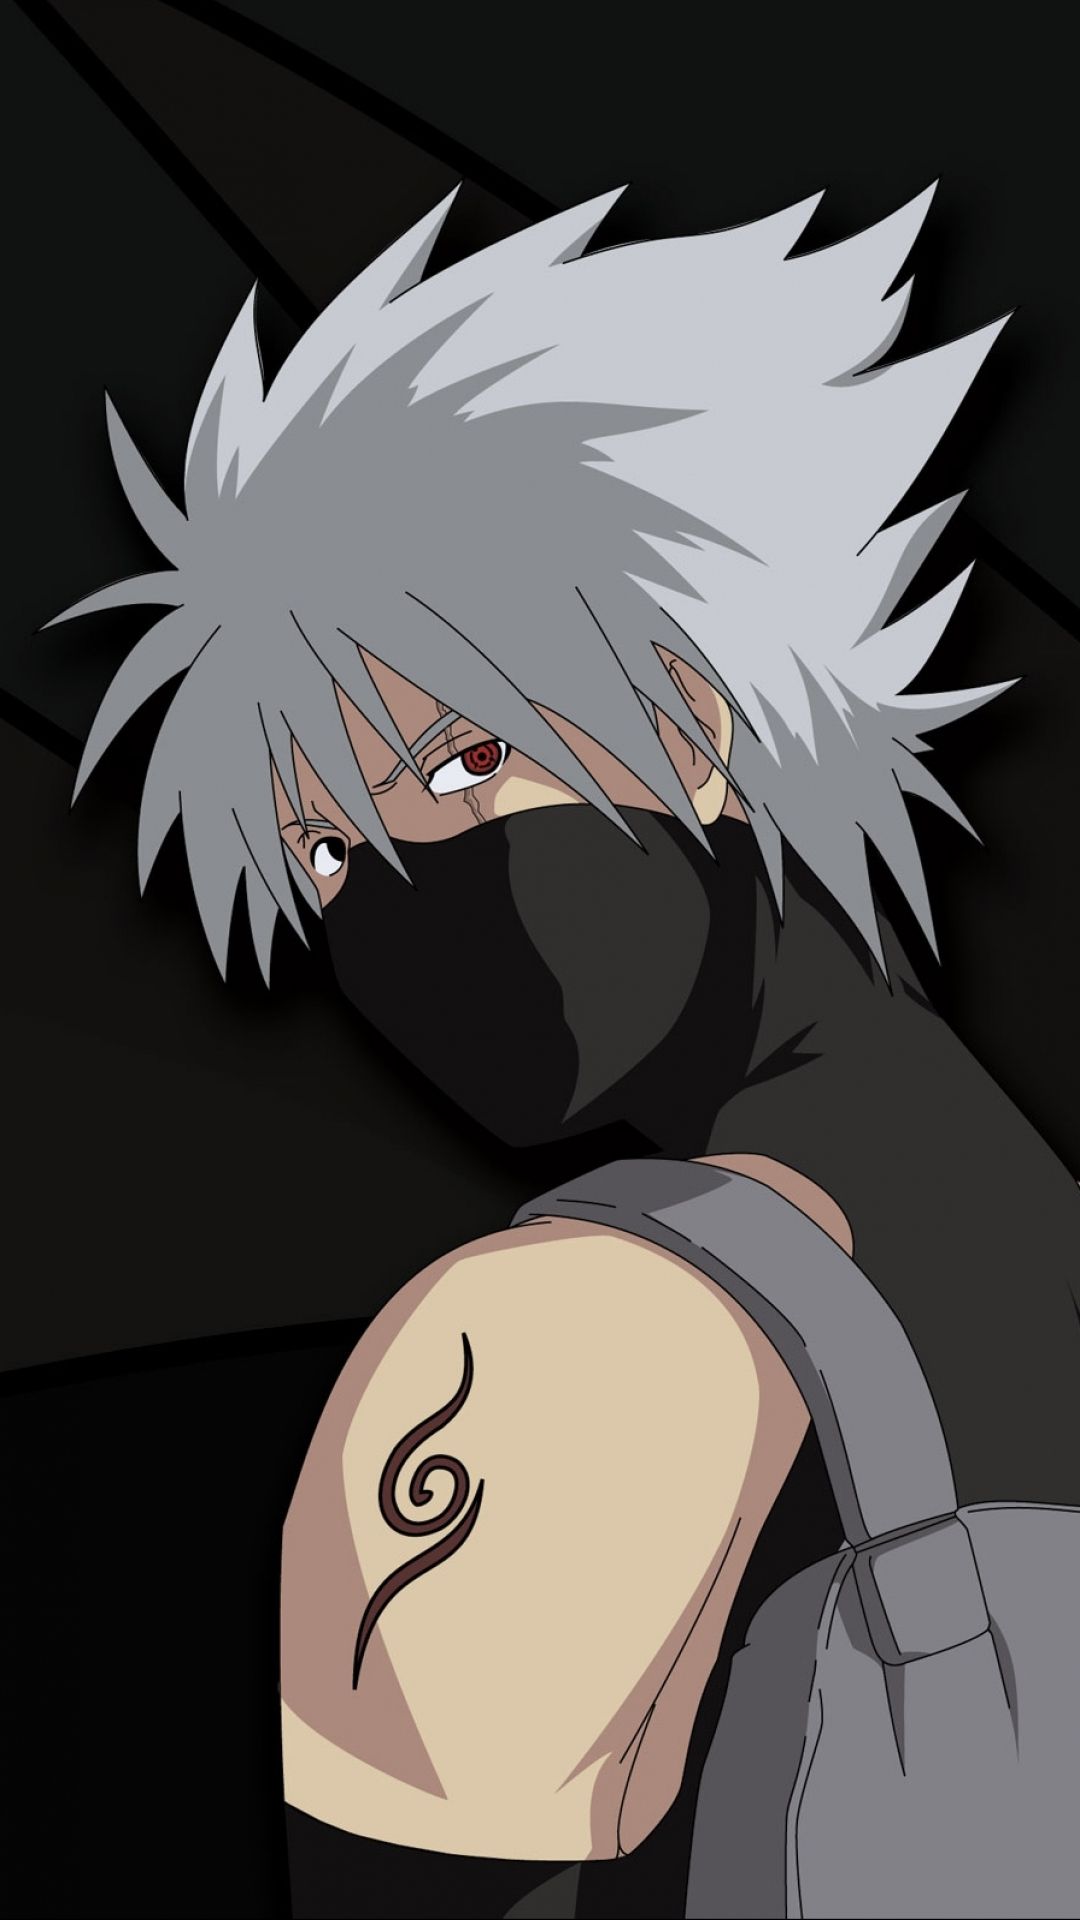 Kakashi Iphone Wallpapers Wallpaper Cave Find the best kakashi wallpaper hd on wallpapertag. kakashi iphone wallpapers wallpaper cave